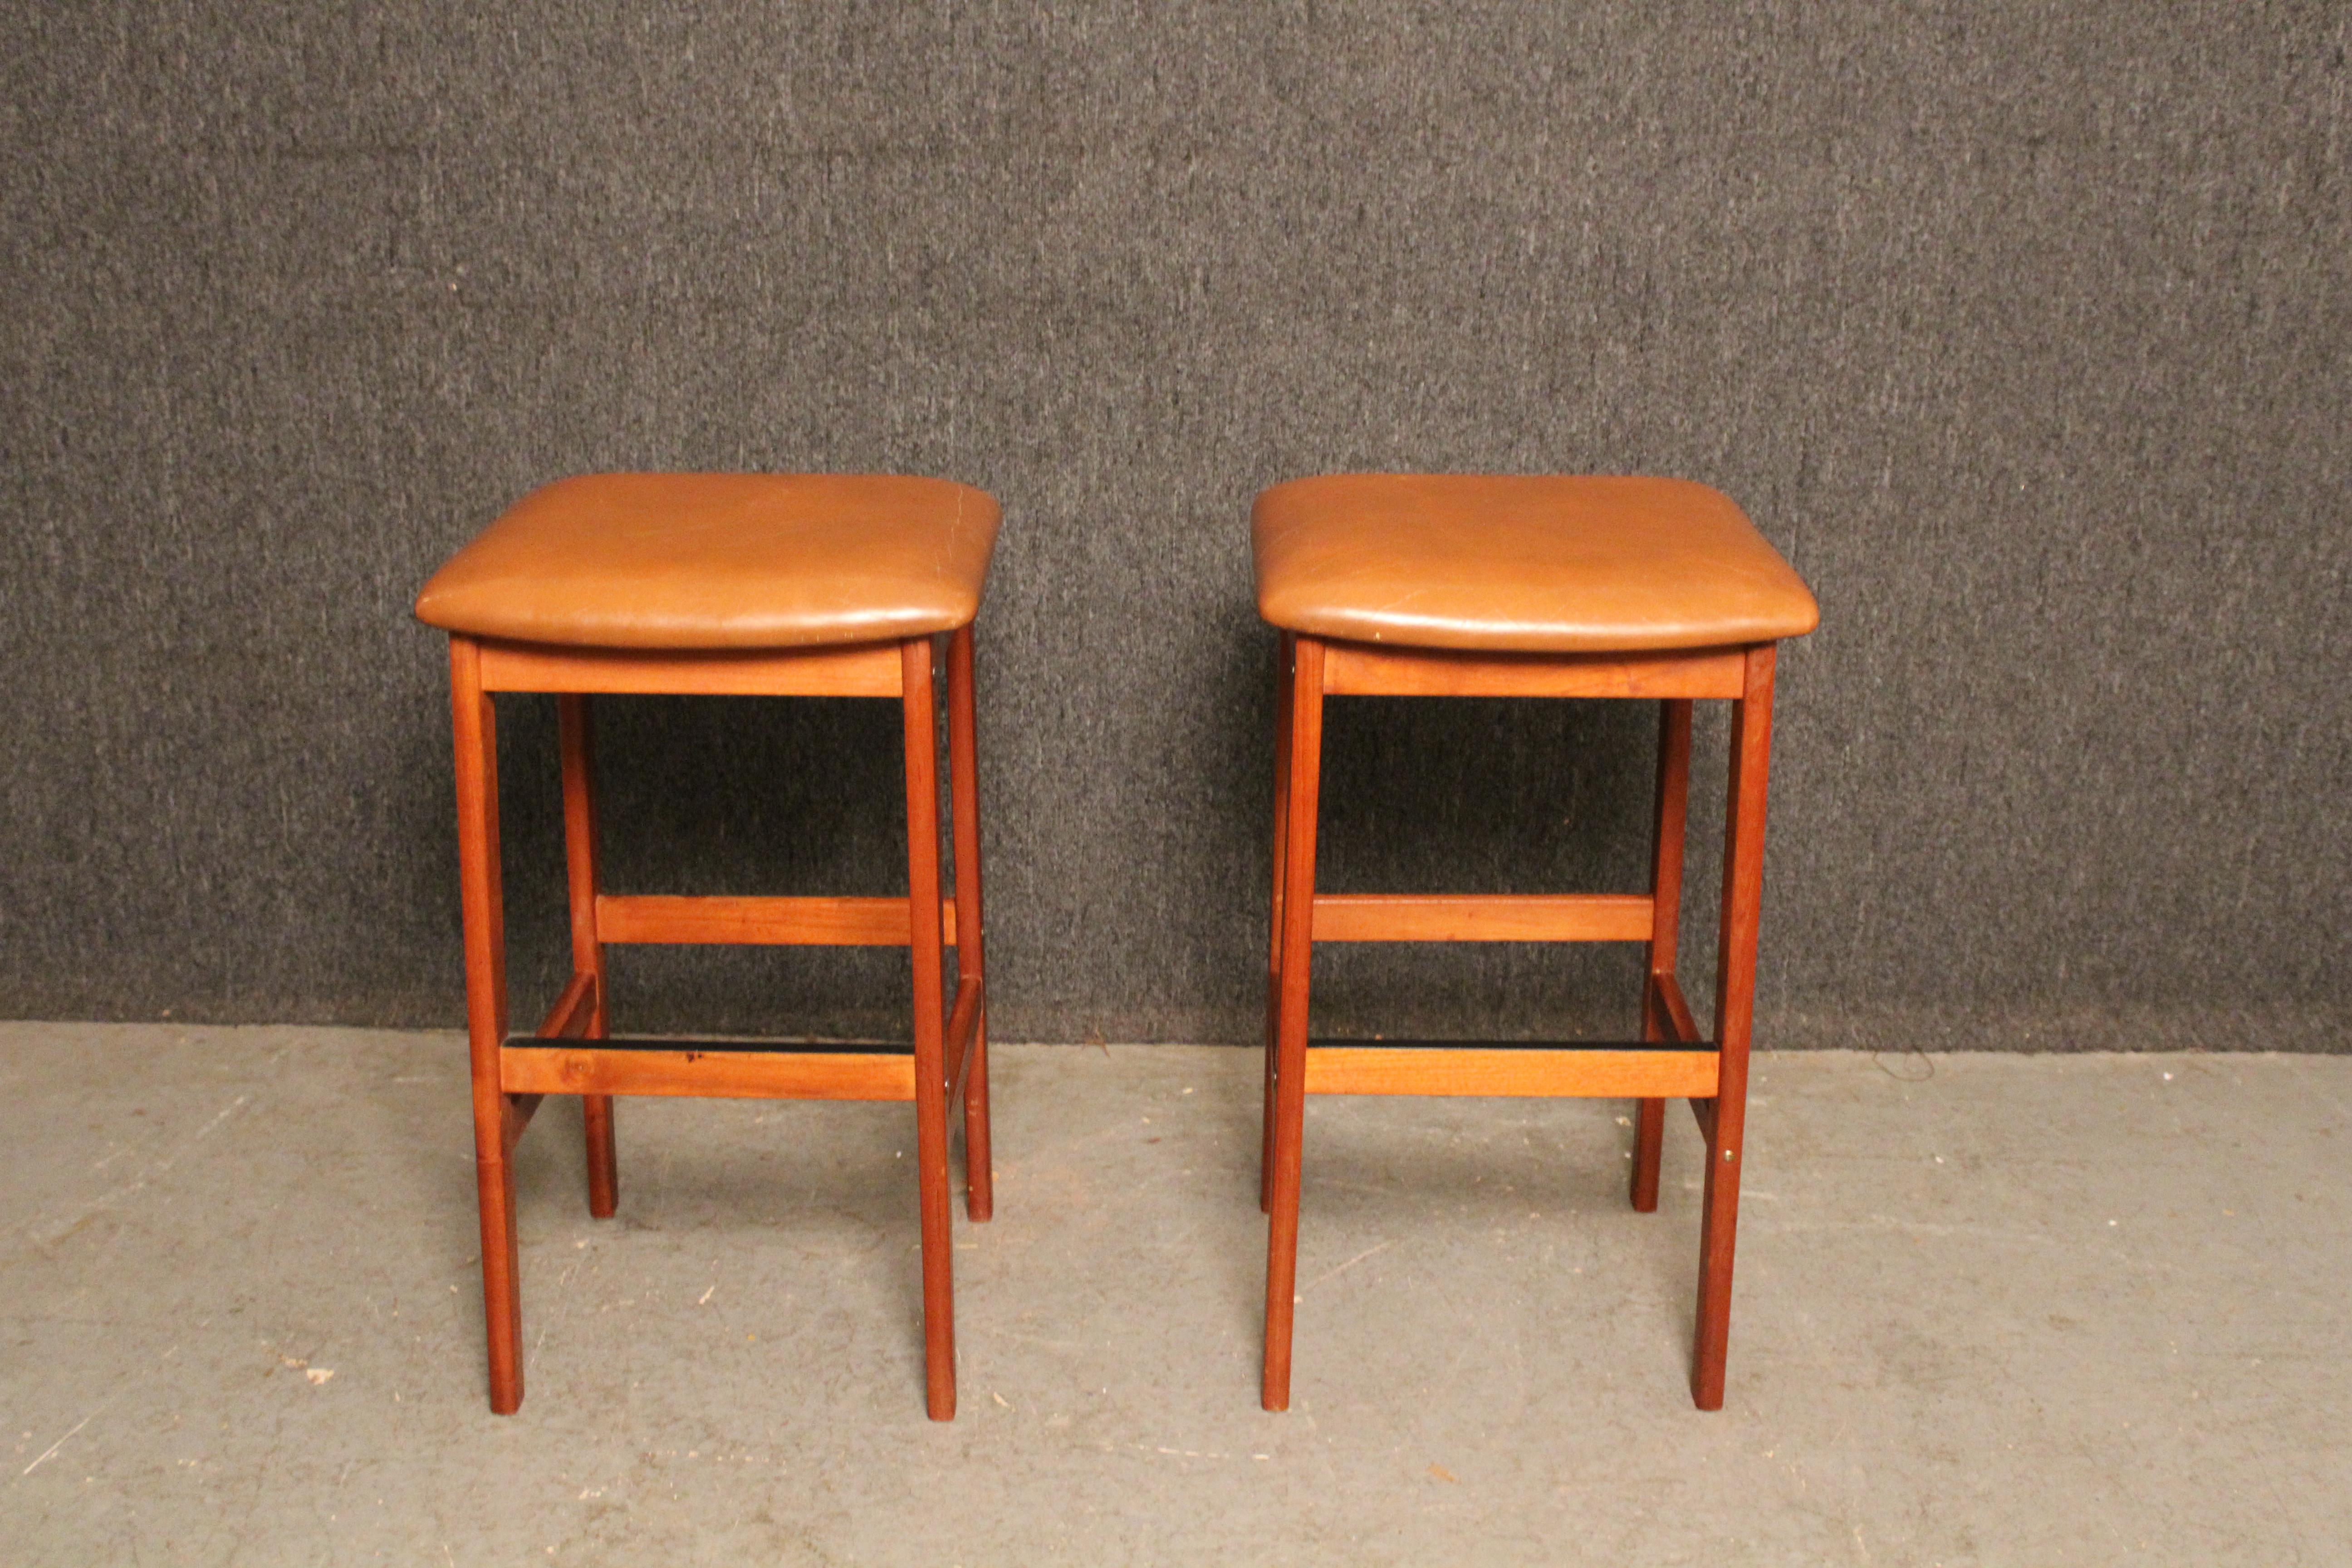 Perch yourself atop classic mid-century Scandinavian modern design with these simple teak stools from Denmark's Korup Stolefabrik. With a shortened 26